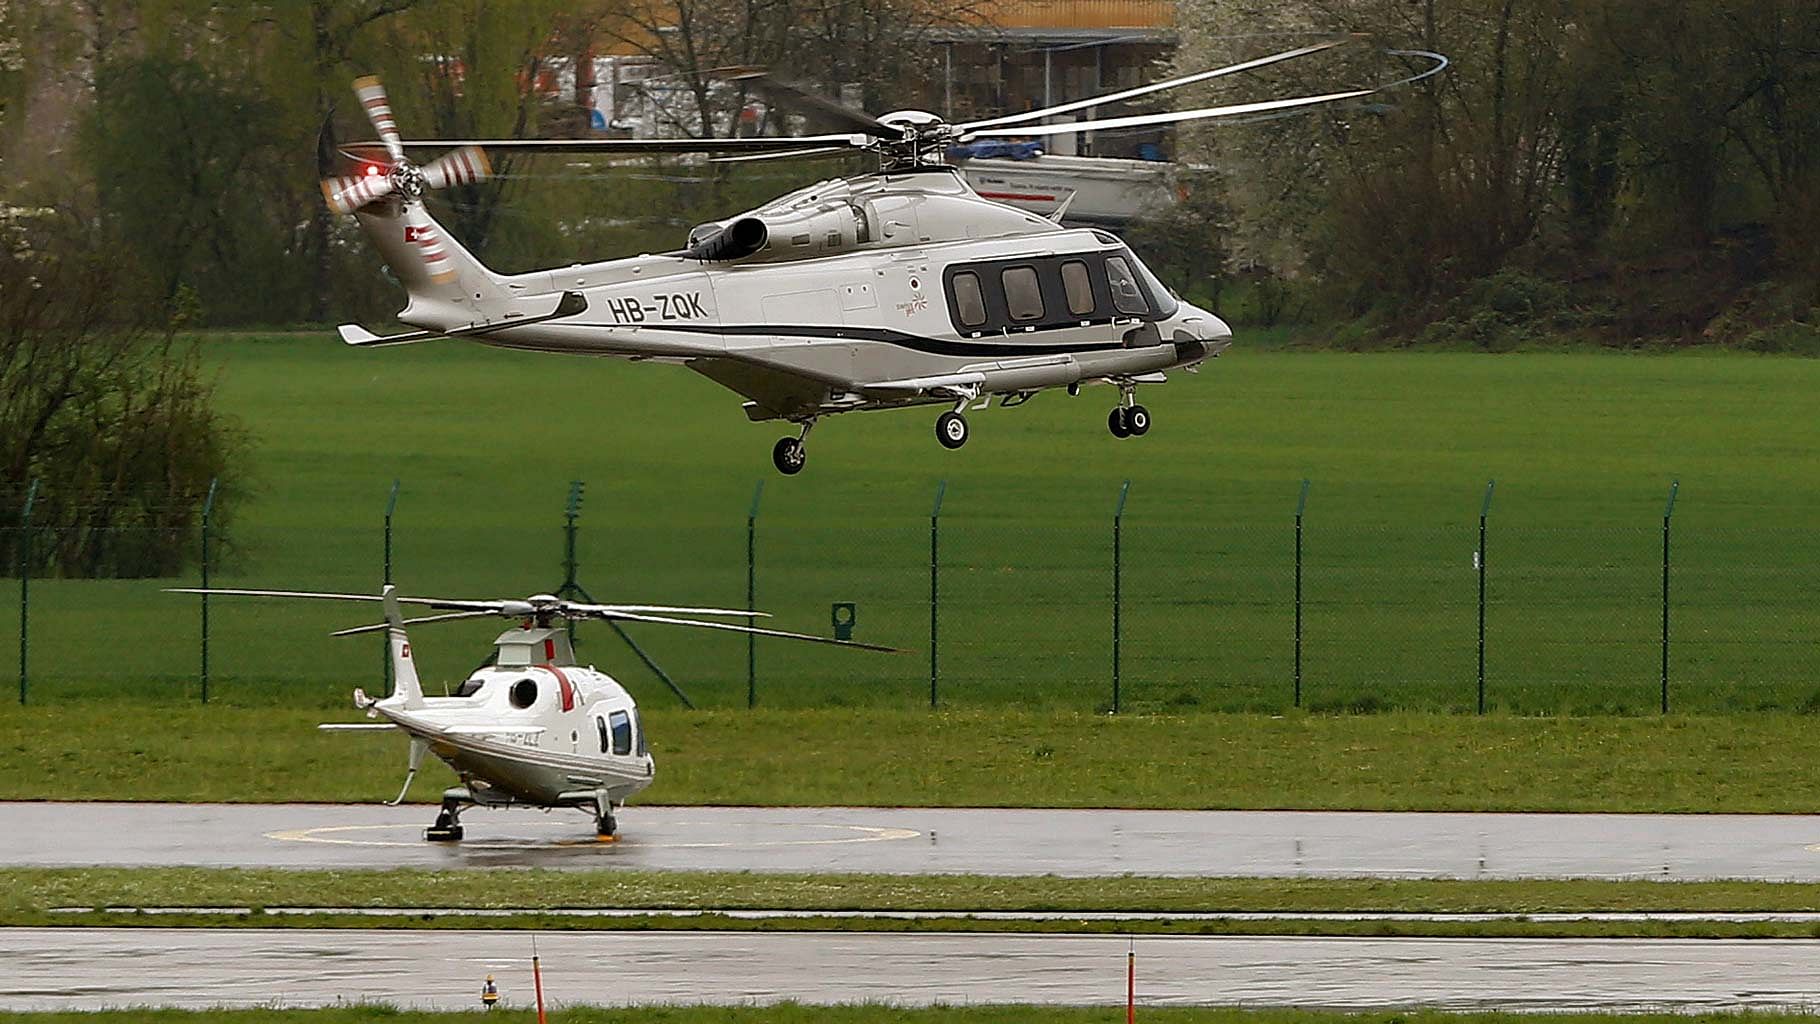 An Agusta-Westland AW139 helicopter. (Photo: Reuters